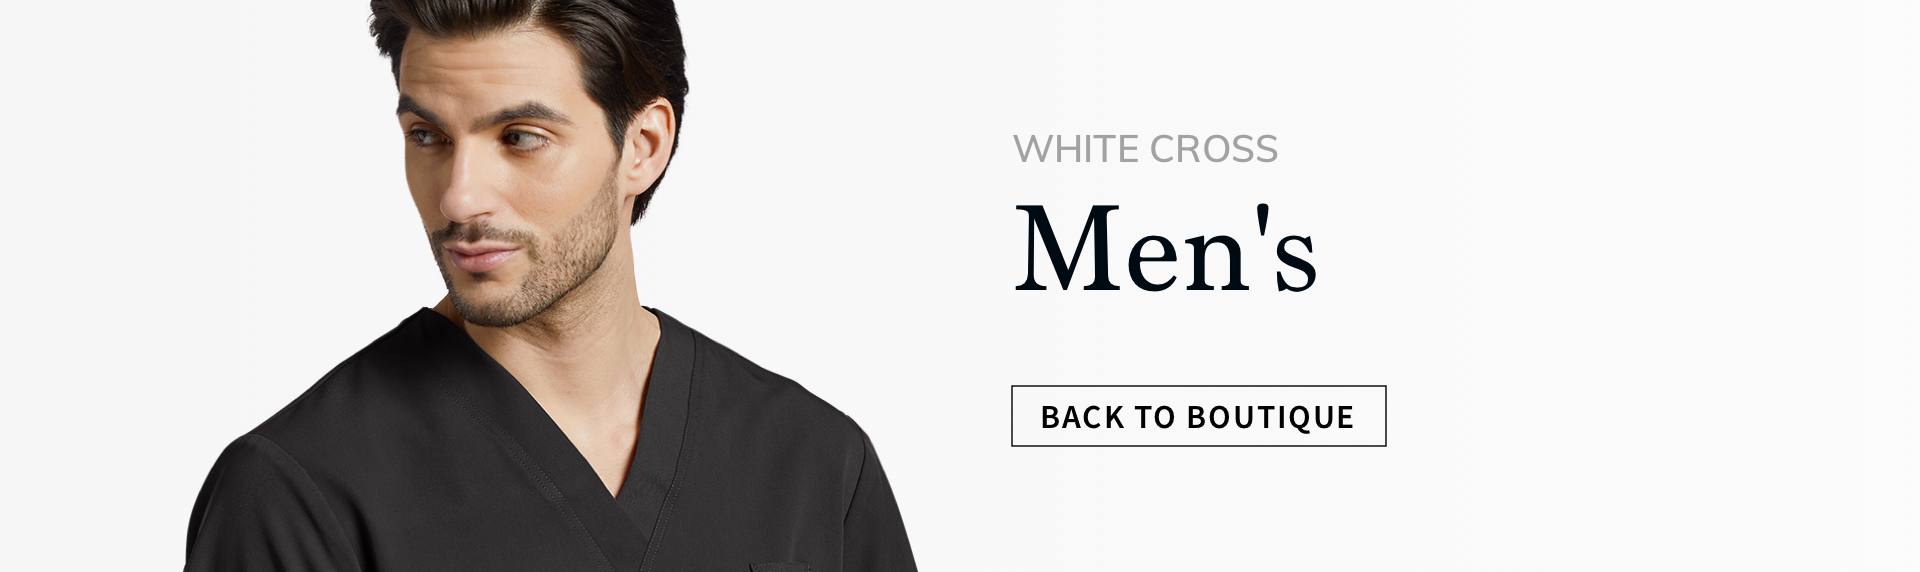 viewing white cross men's products. click to go back to boutique.